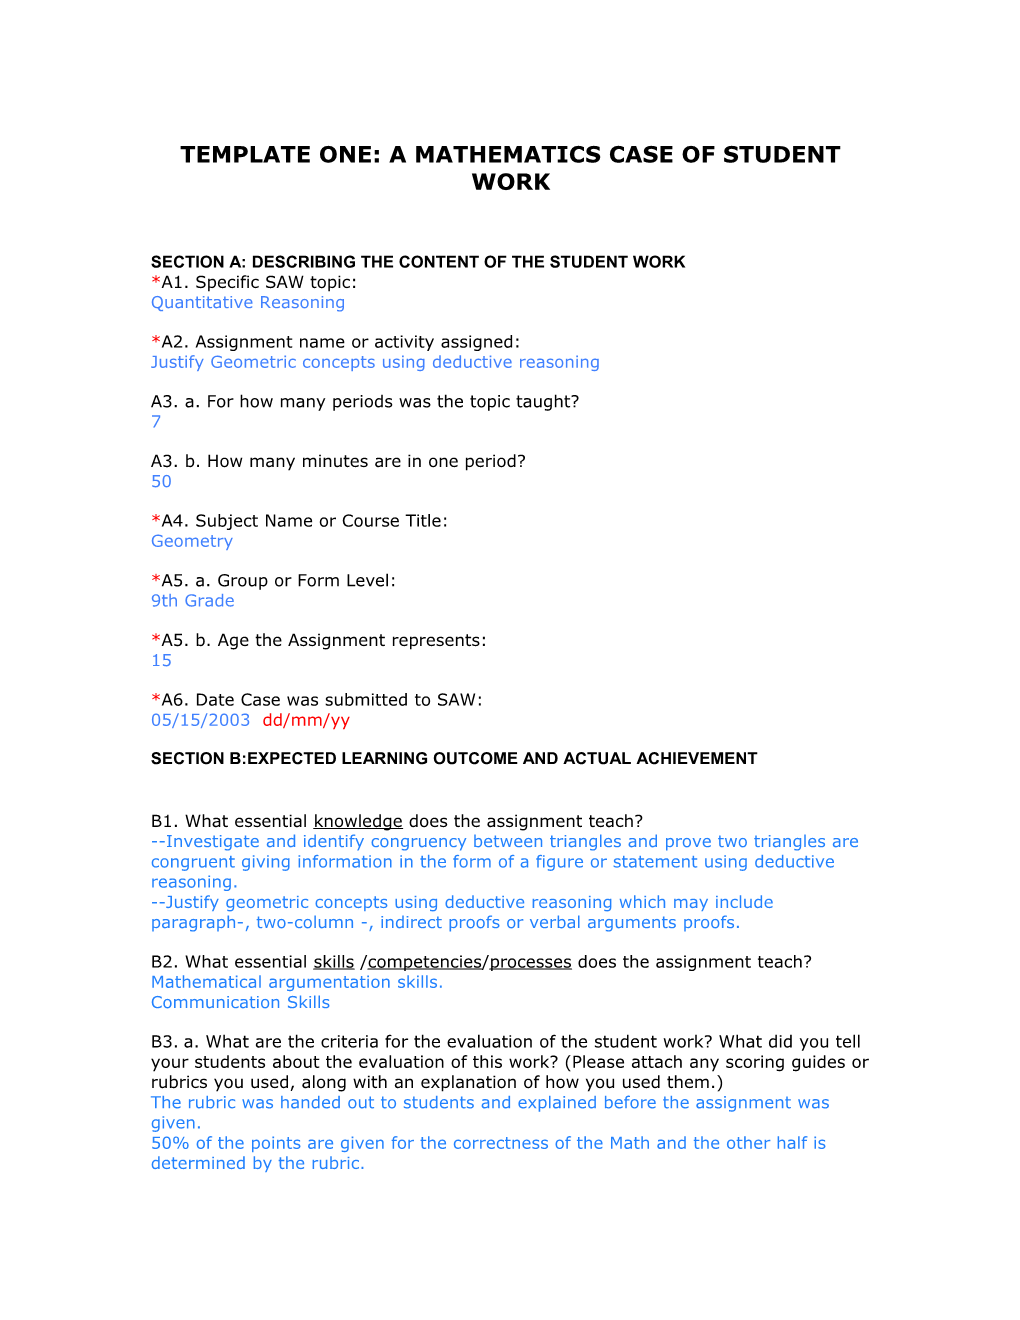 Template One: a Mathematics Case of Student Work